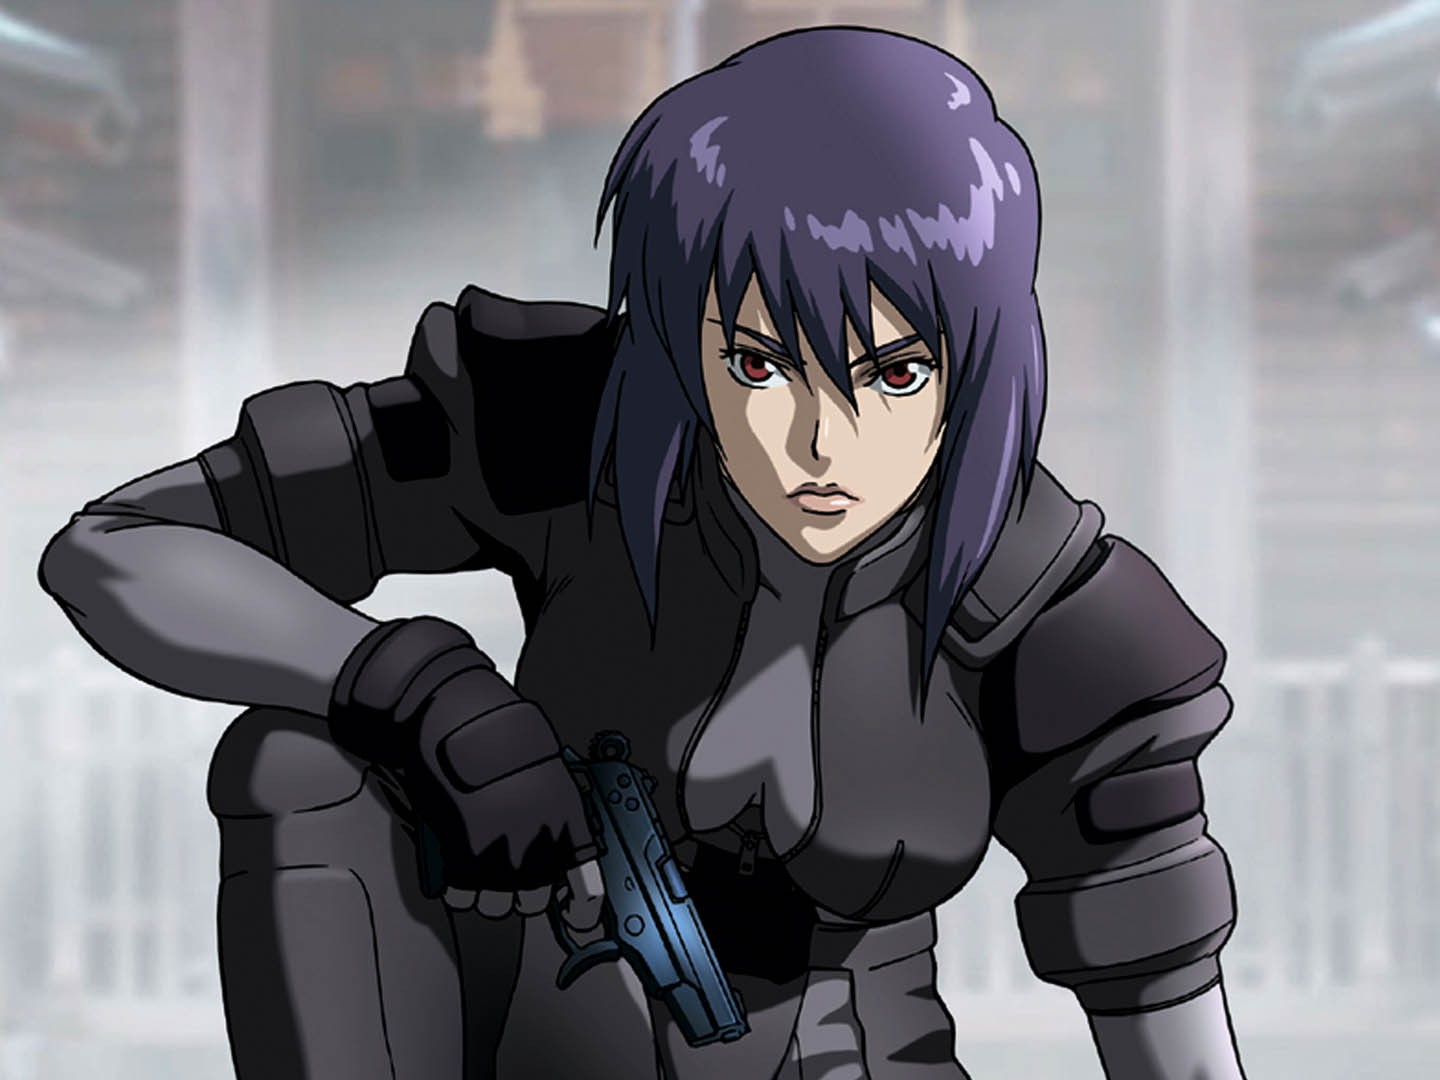 How Ghost in the Shell: Stand Alone Complex Went From Massive Risk